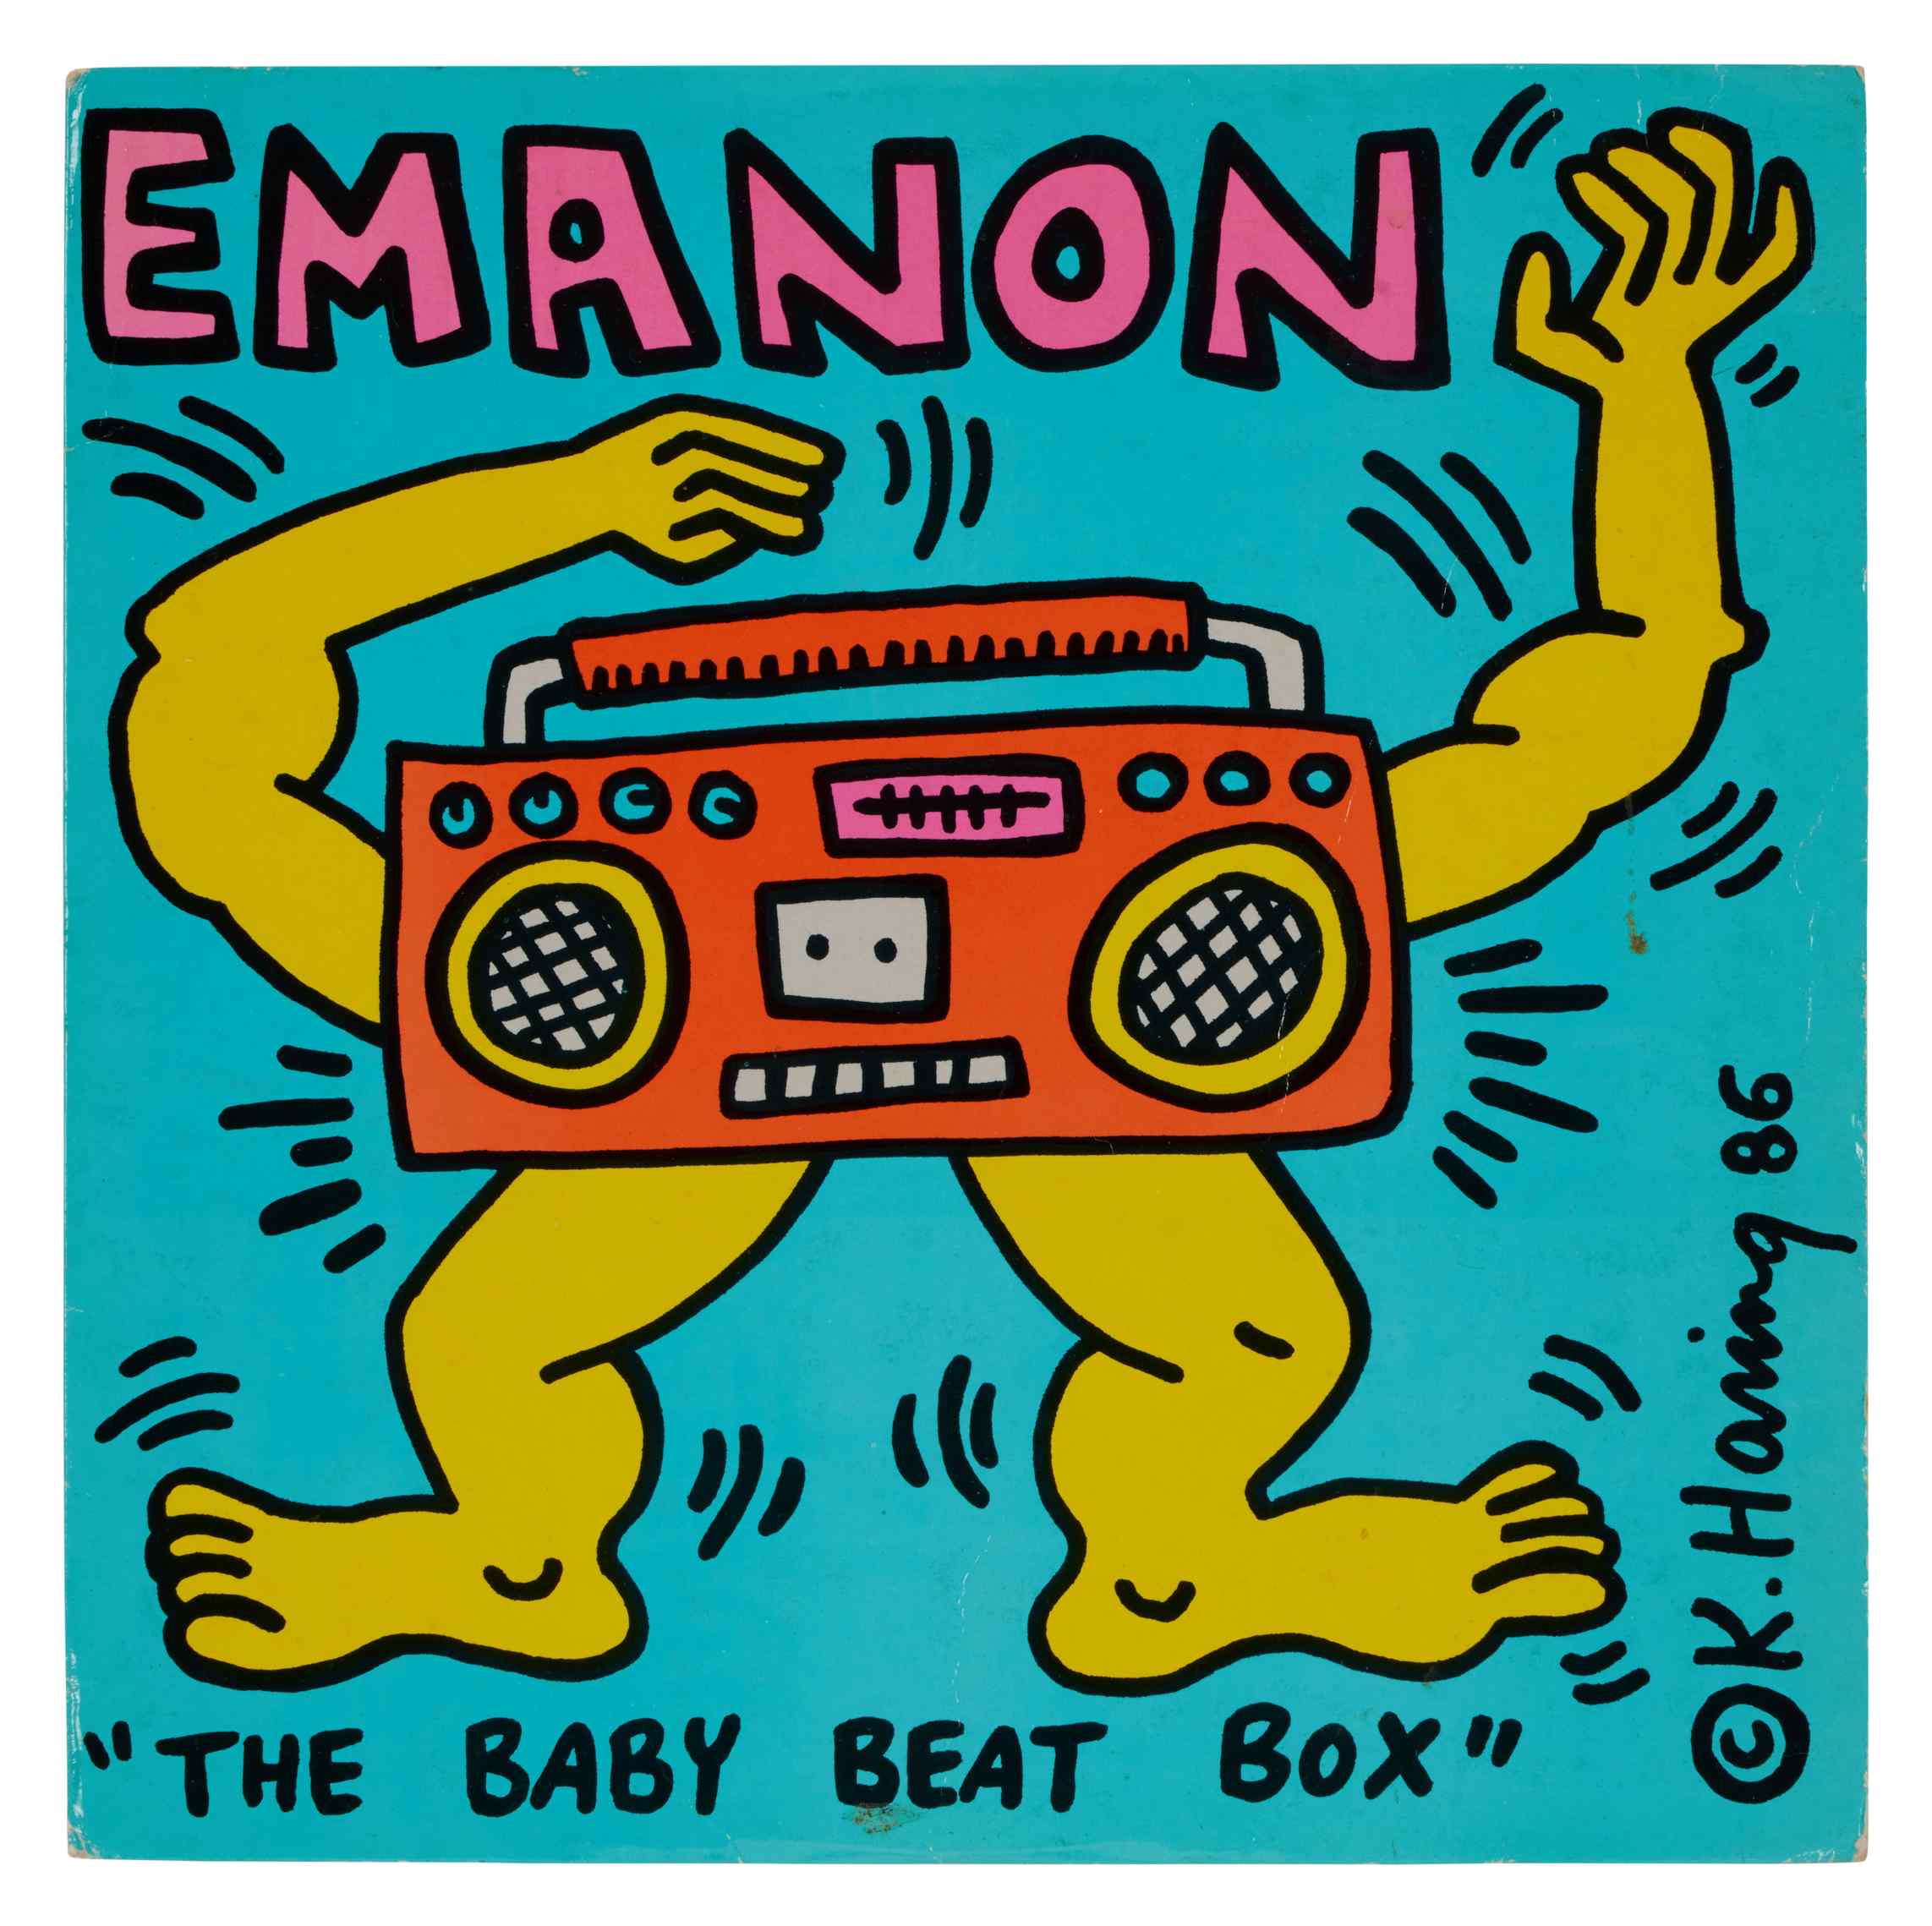 Emanon’s_Baby_Beat_Box,_Inscribed_by_Keith_Haring_(creator_of_the_cover_art)_to_Album_Producer_Afrika_Islam.jpeg